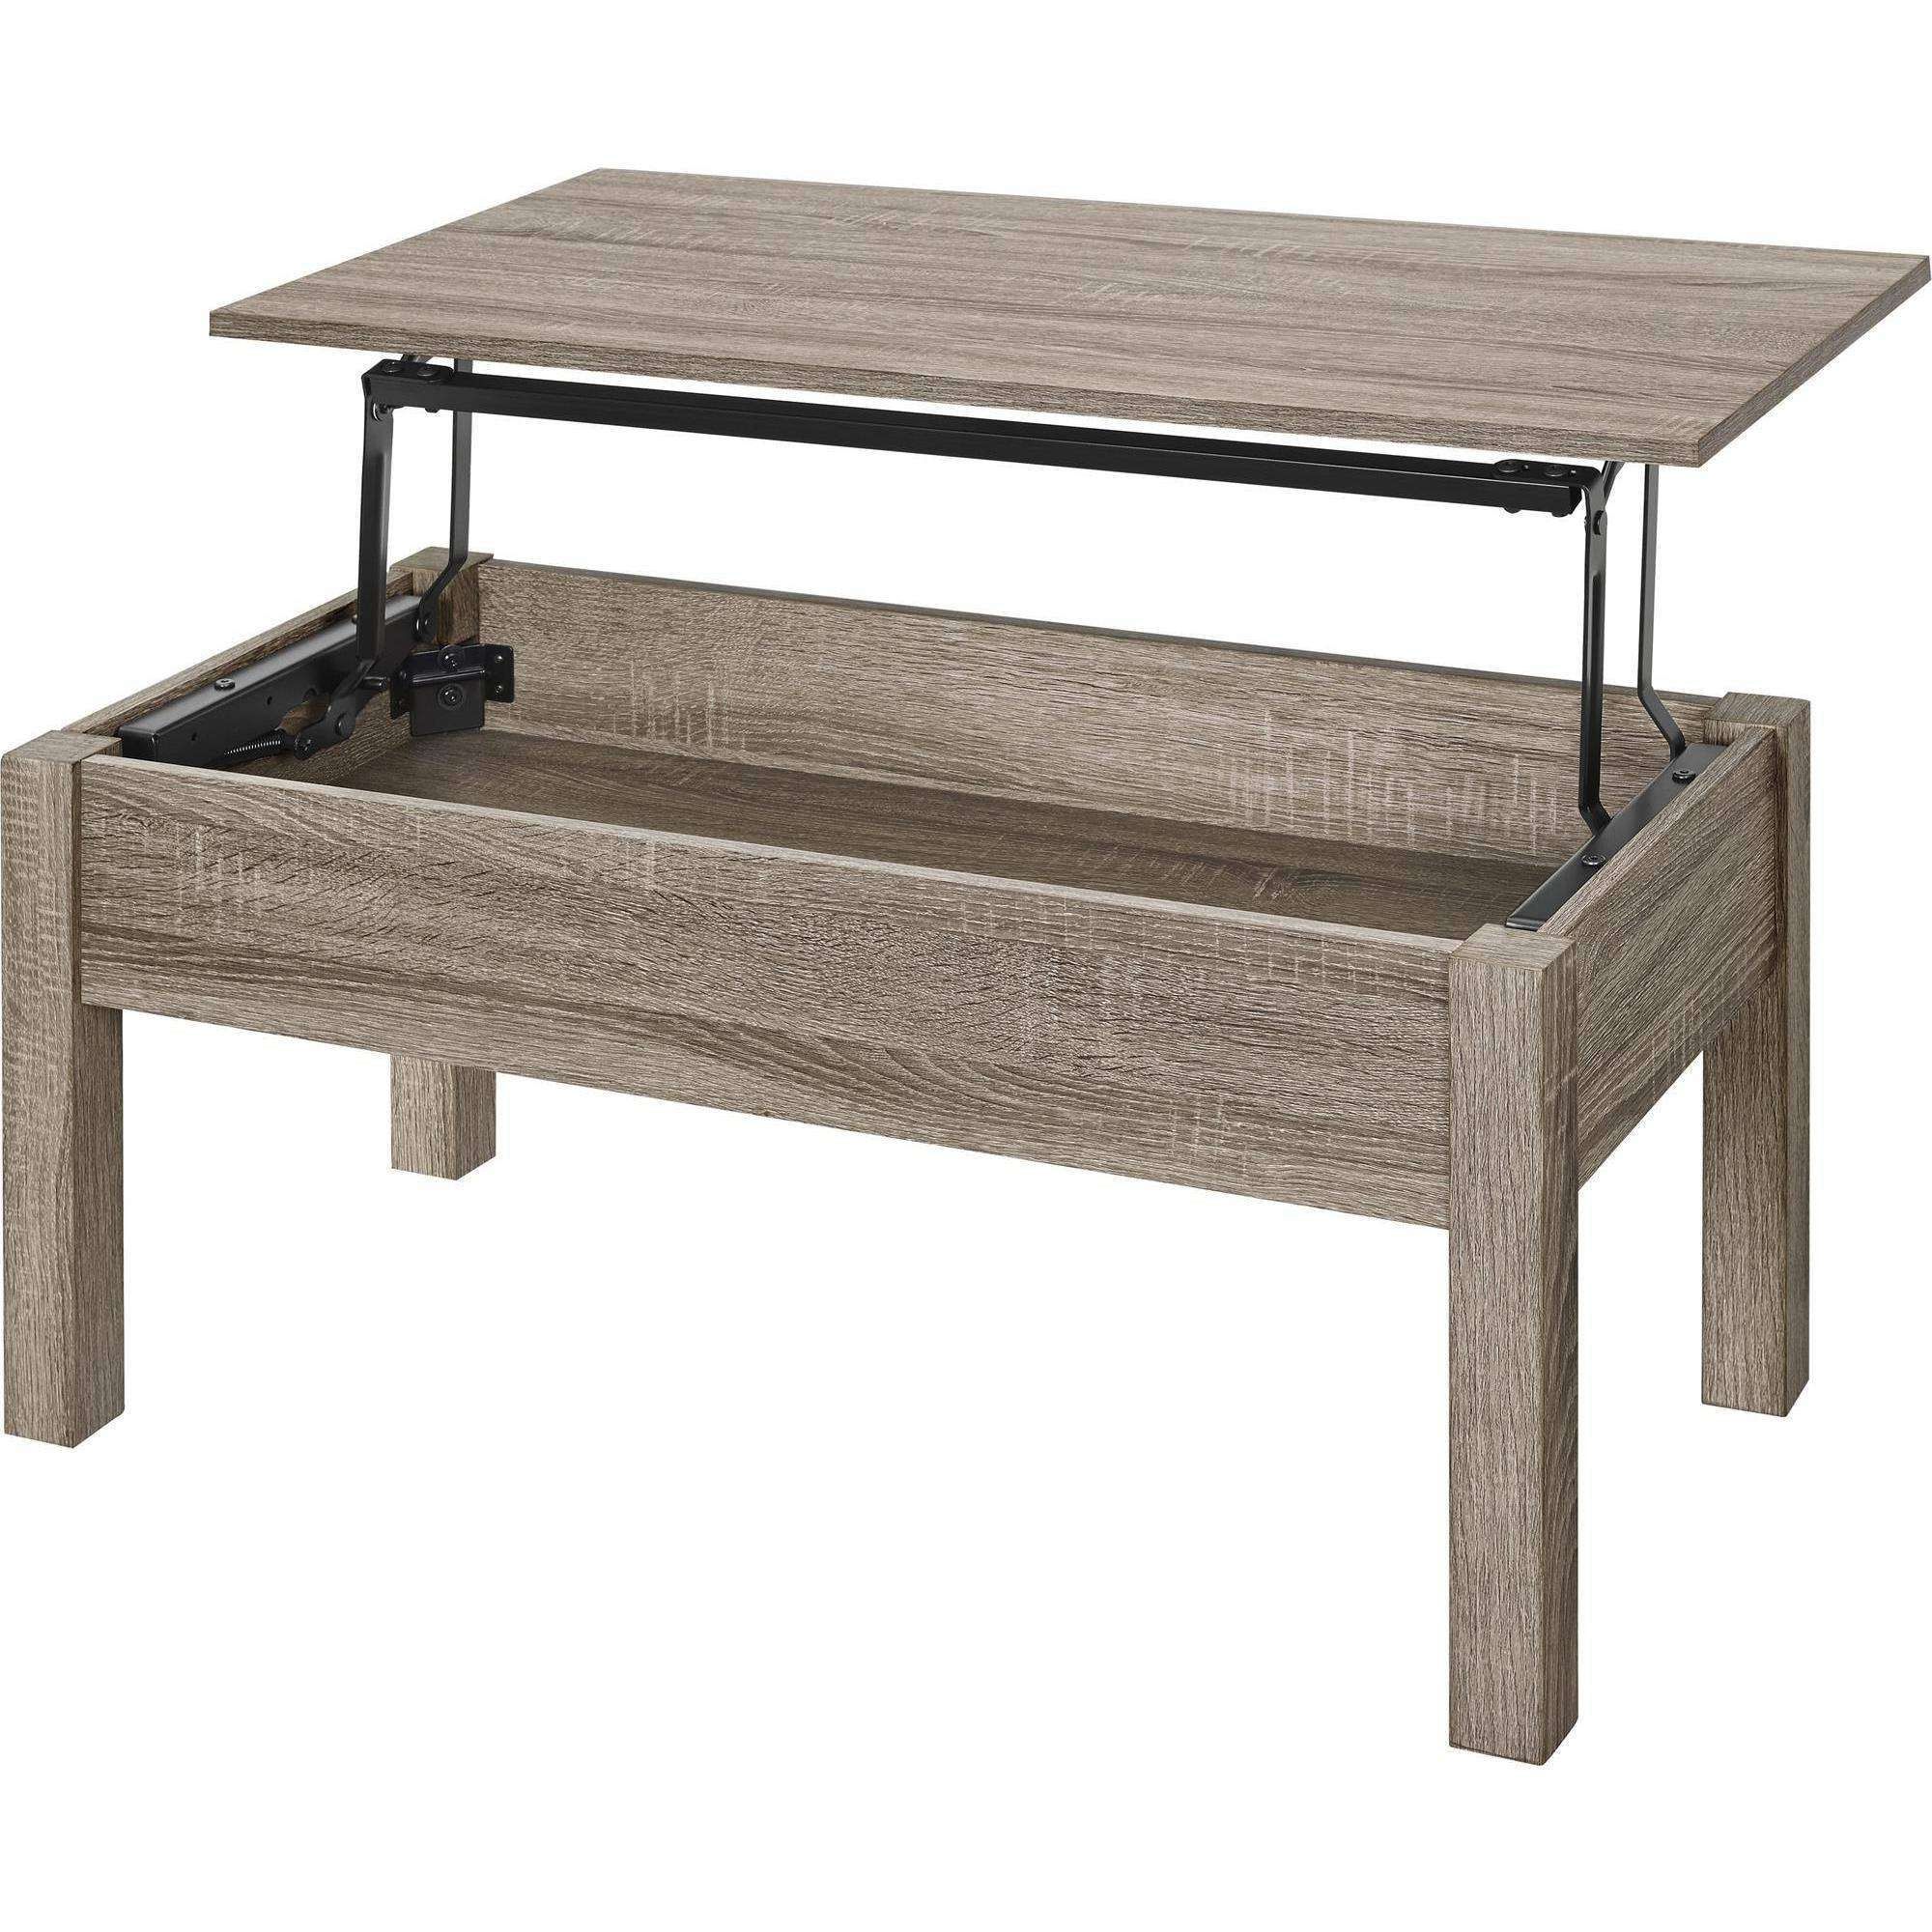 Most Recently Released Swing Up Coffee Tables Within Mainstays Lift Top Coffee Table, Multiple Colors – Walmart In (View 1 of 20)